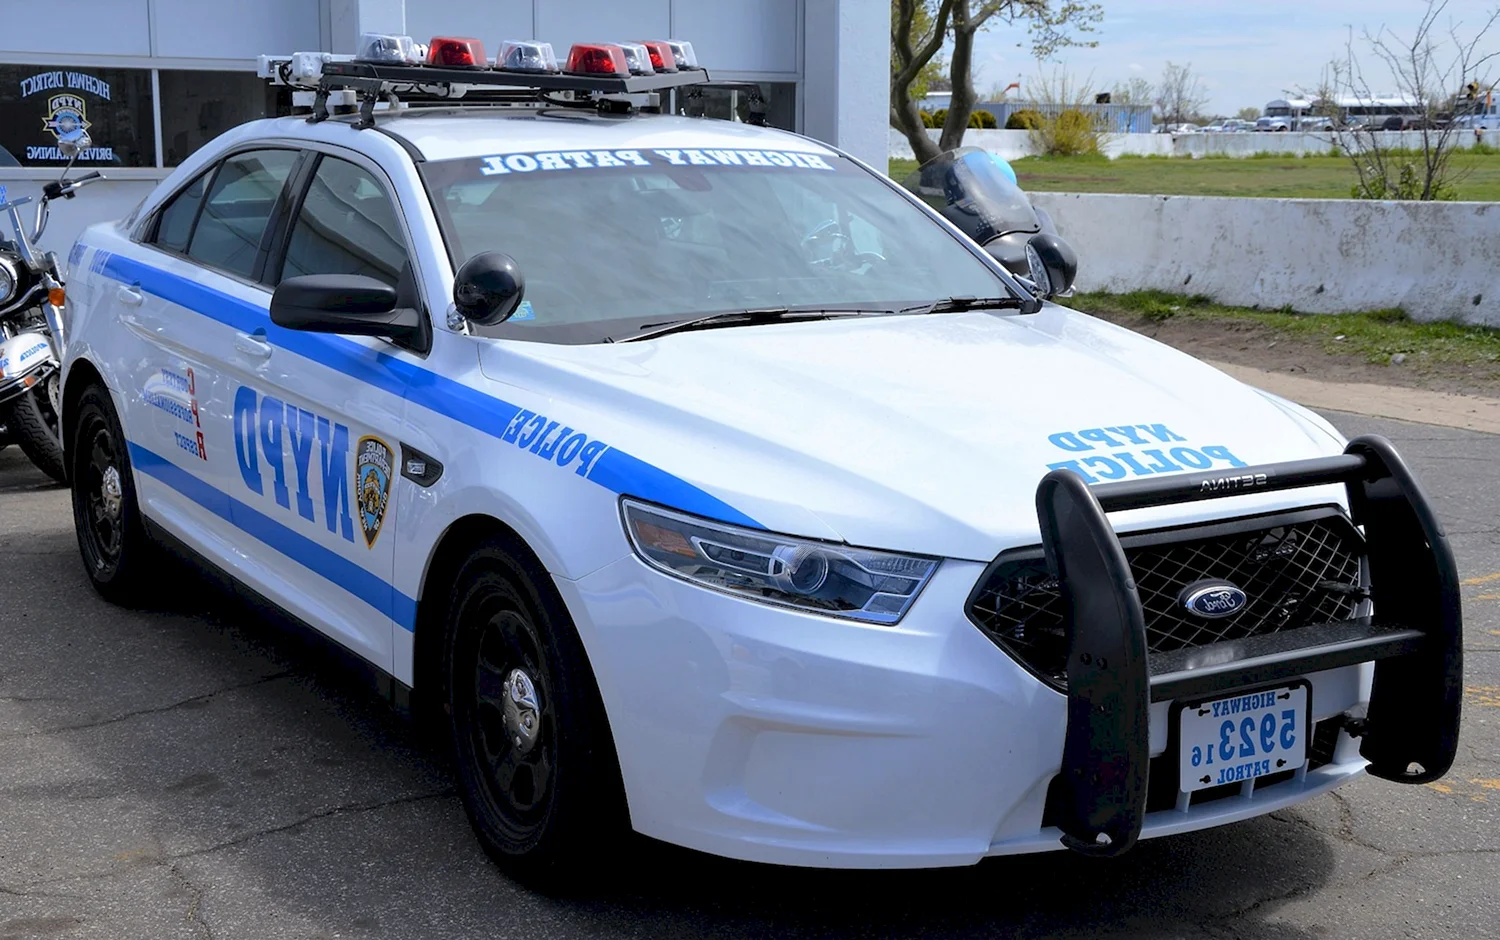 Ford Mondeo NYPD